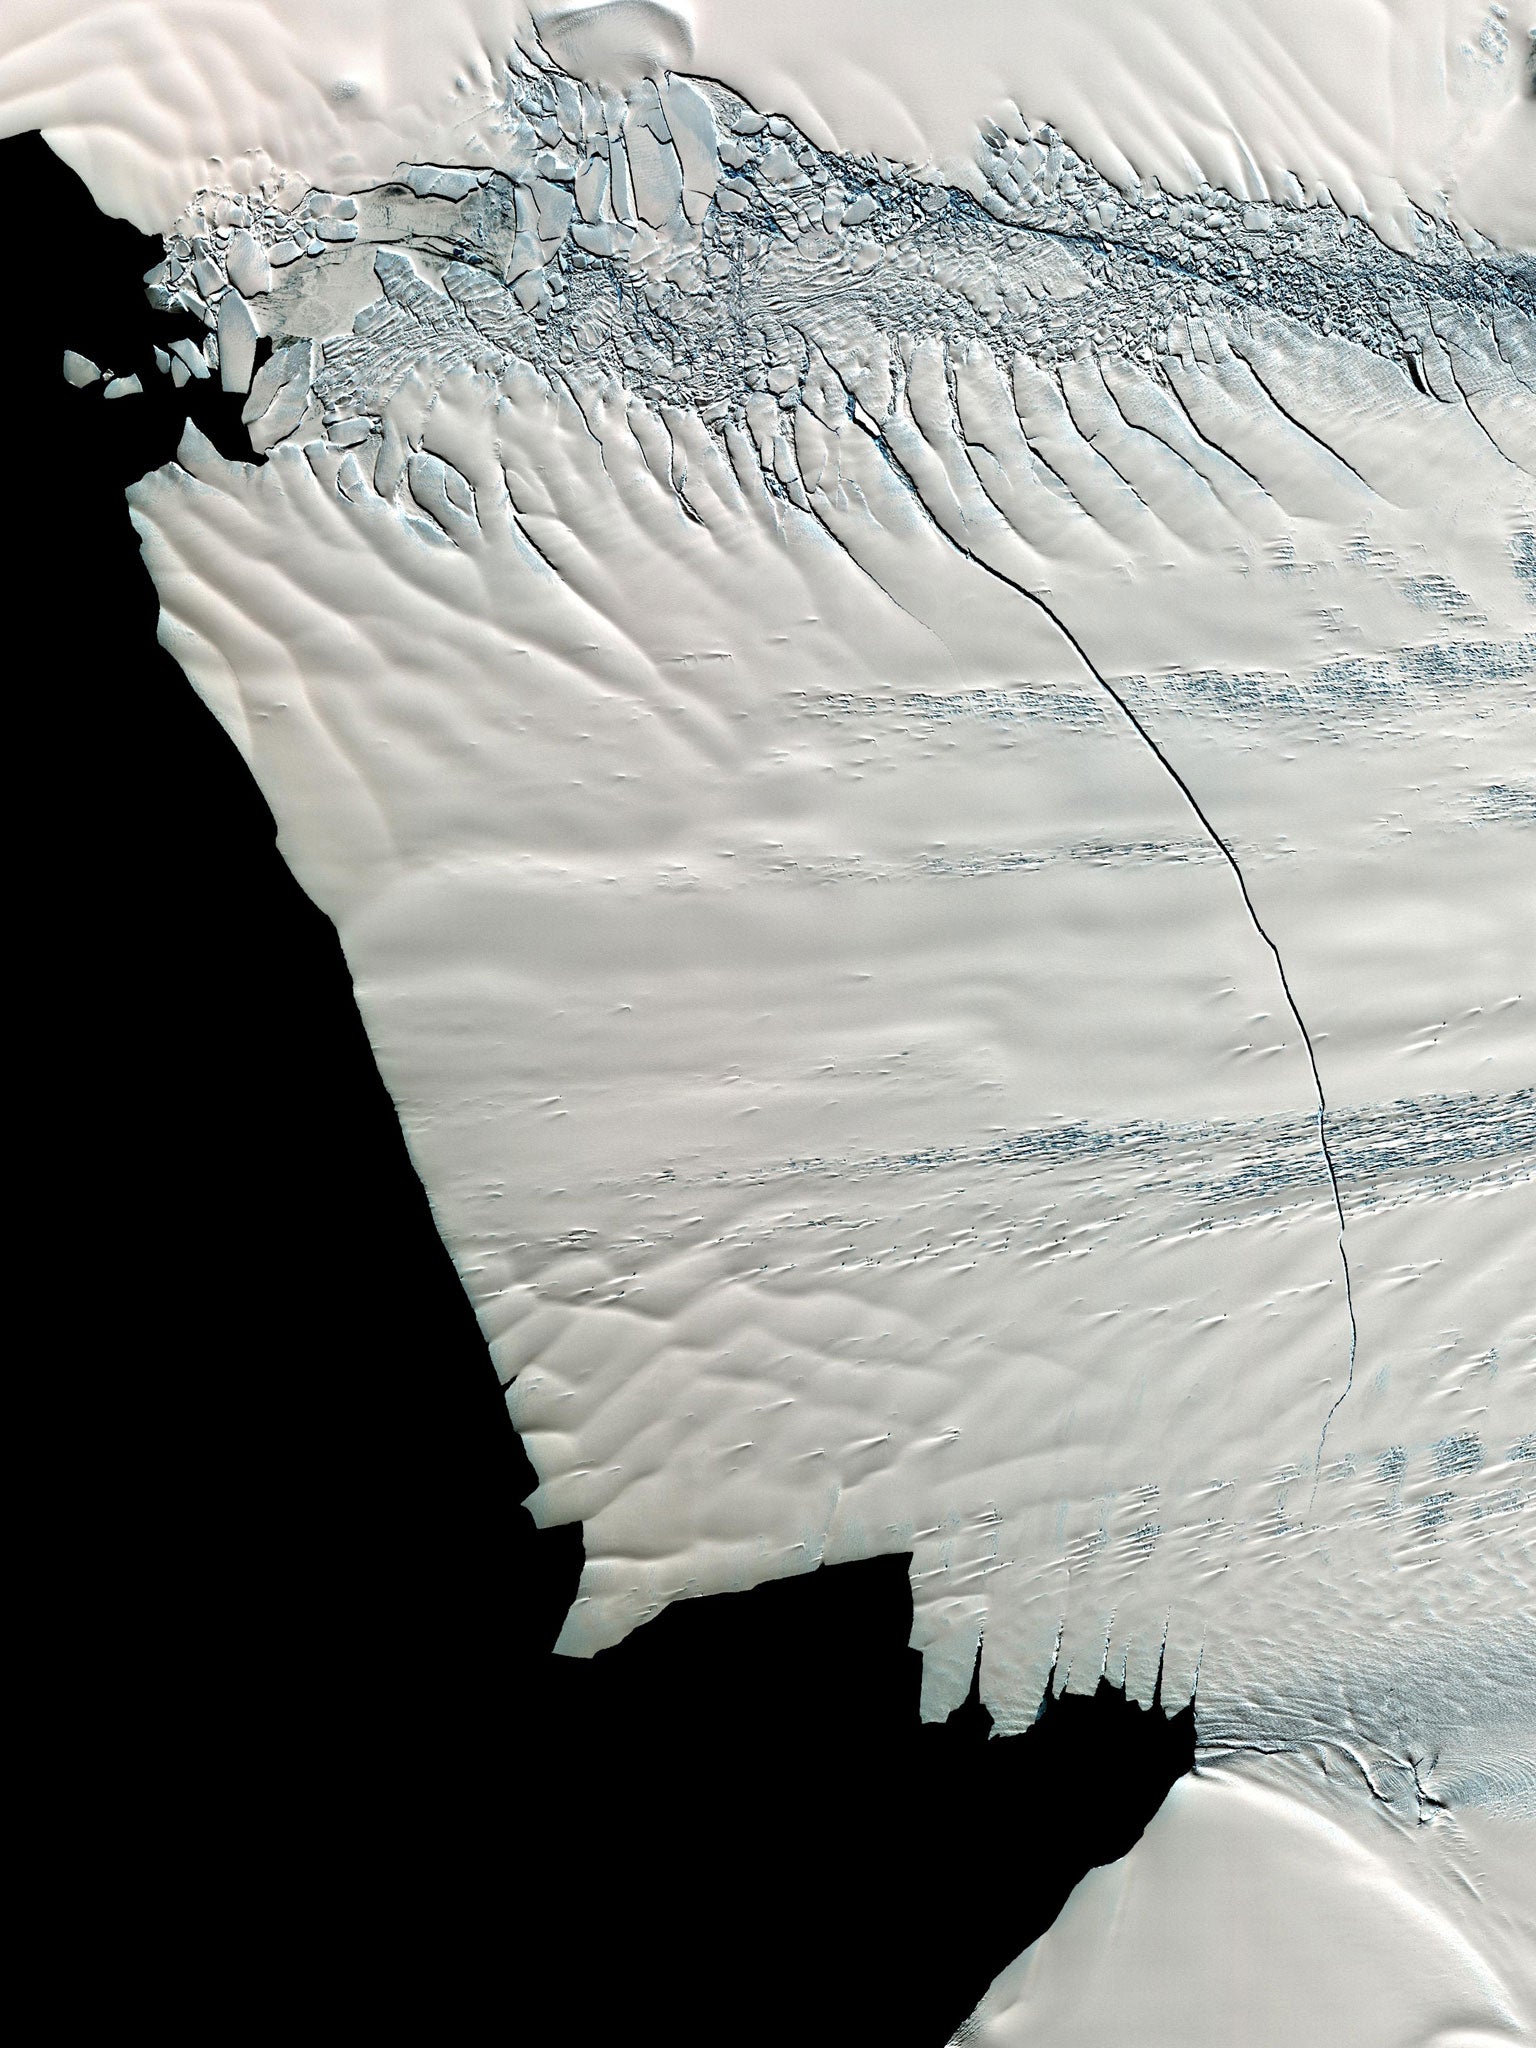 An image captured in November 2011 by NASA's Terra spacecraft, showing the crack developing on the Pine Island Glacier. The iceberg has separated from the sheet in the past few days